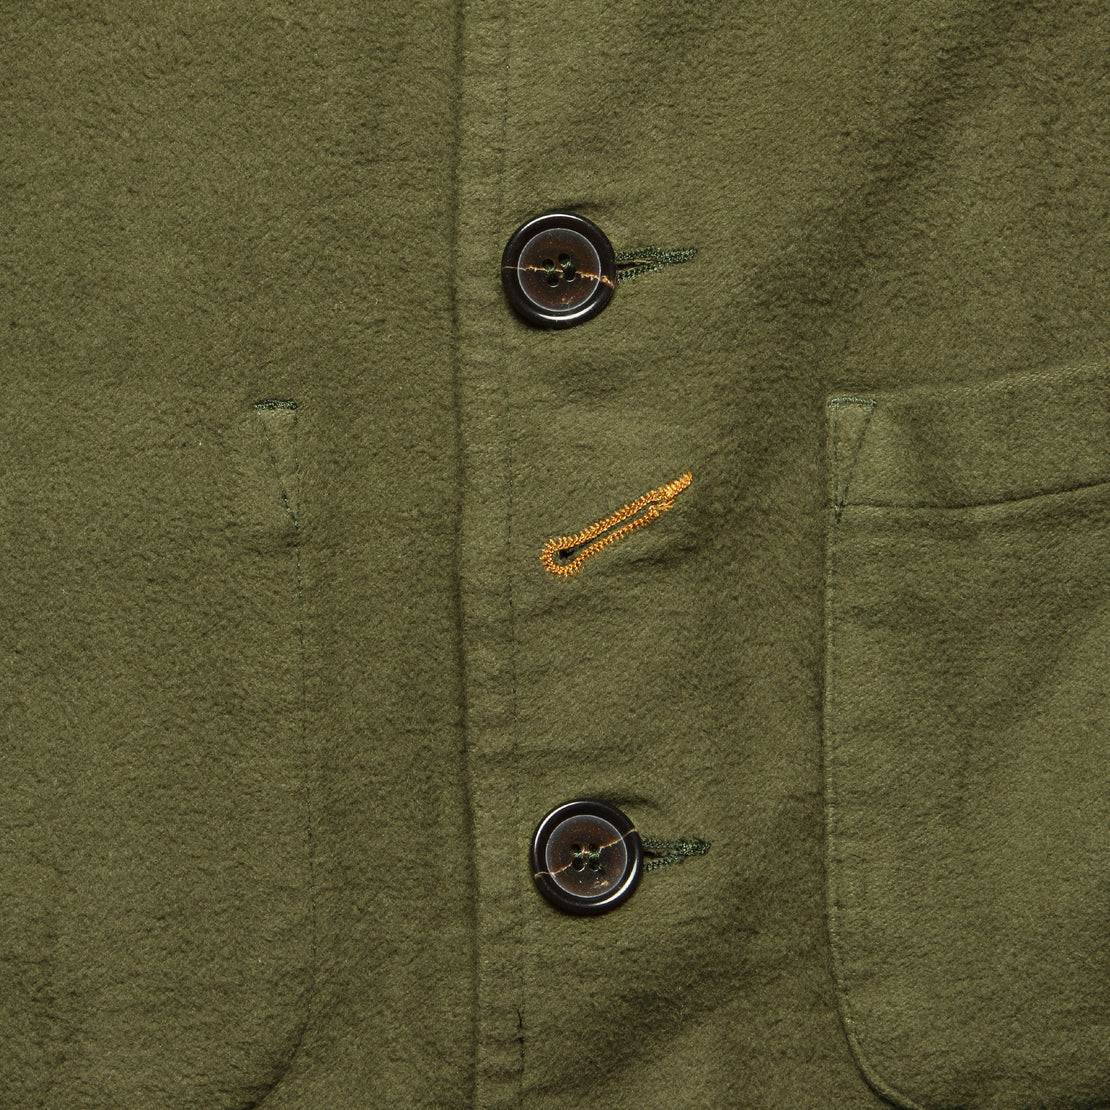 Moleskin Bakers Jacket - Moss - Universal Works - STAG Provisions - Suiting - Sport Coat